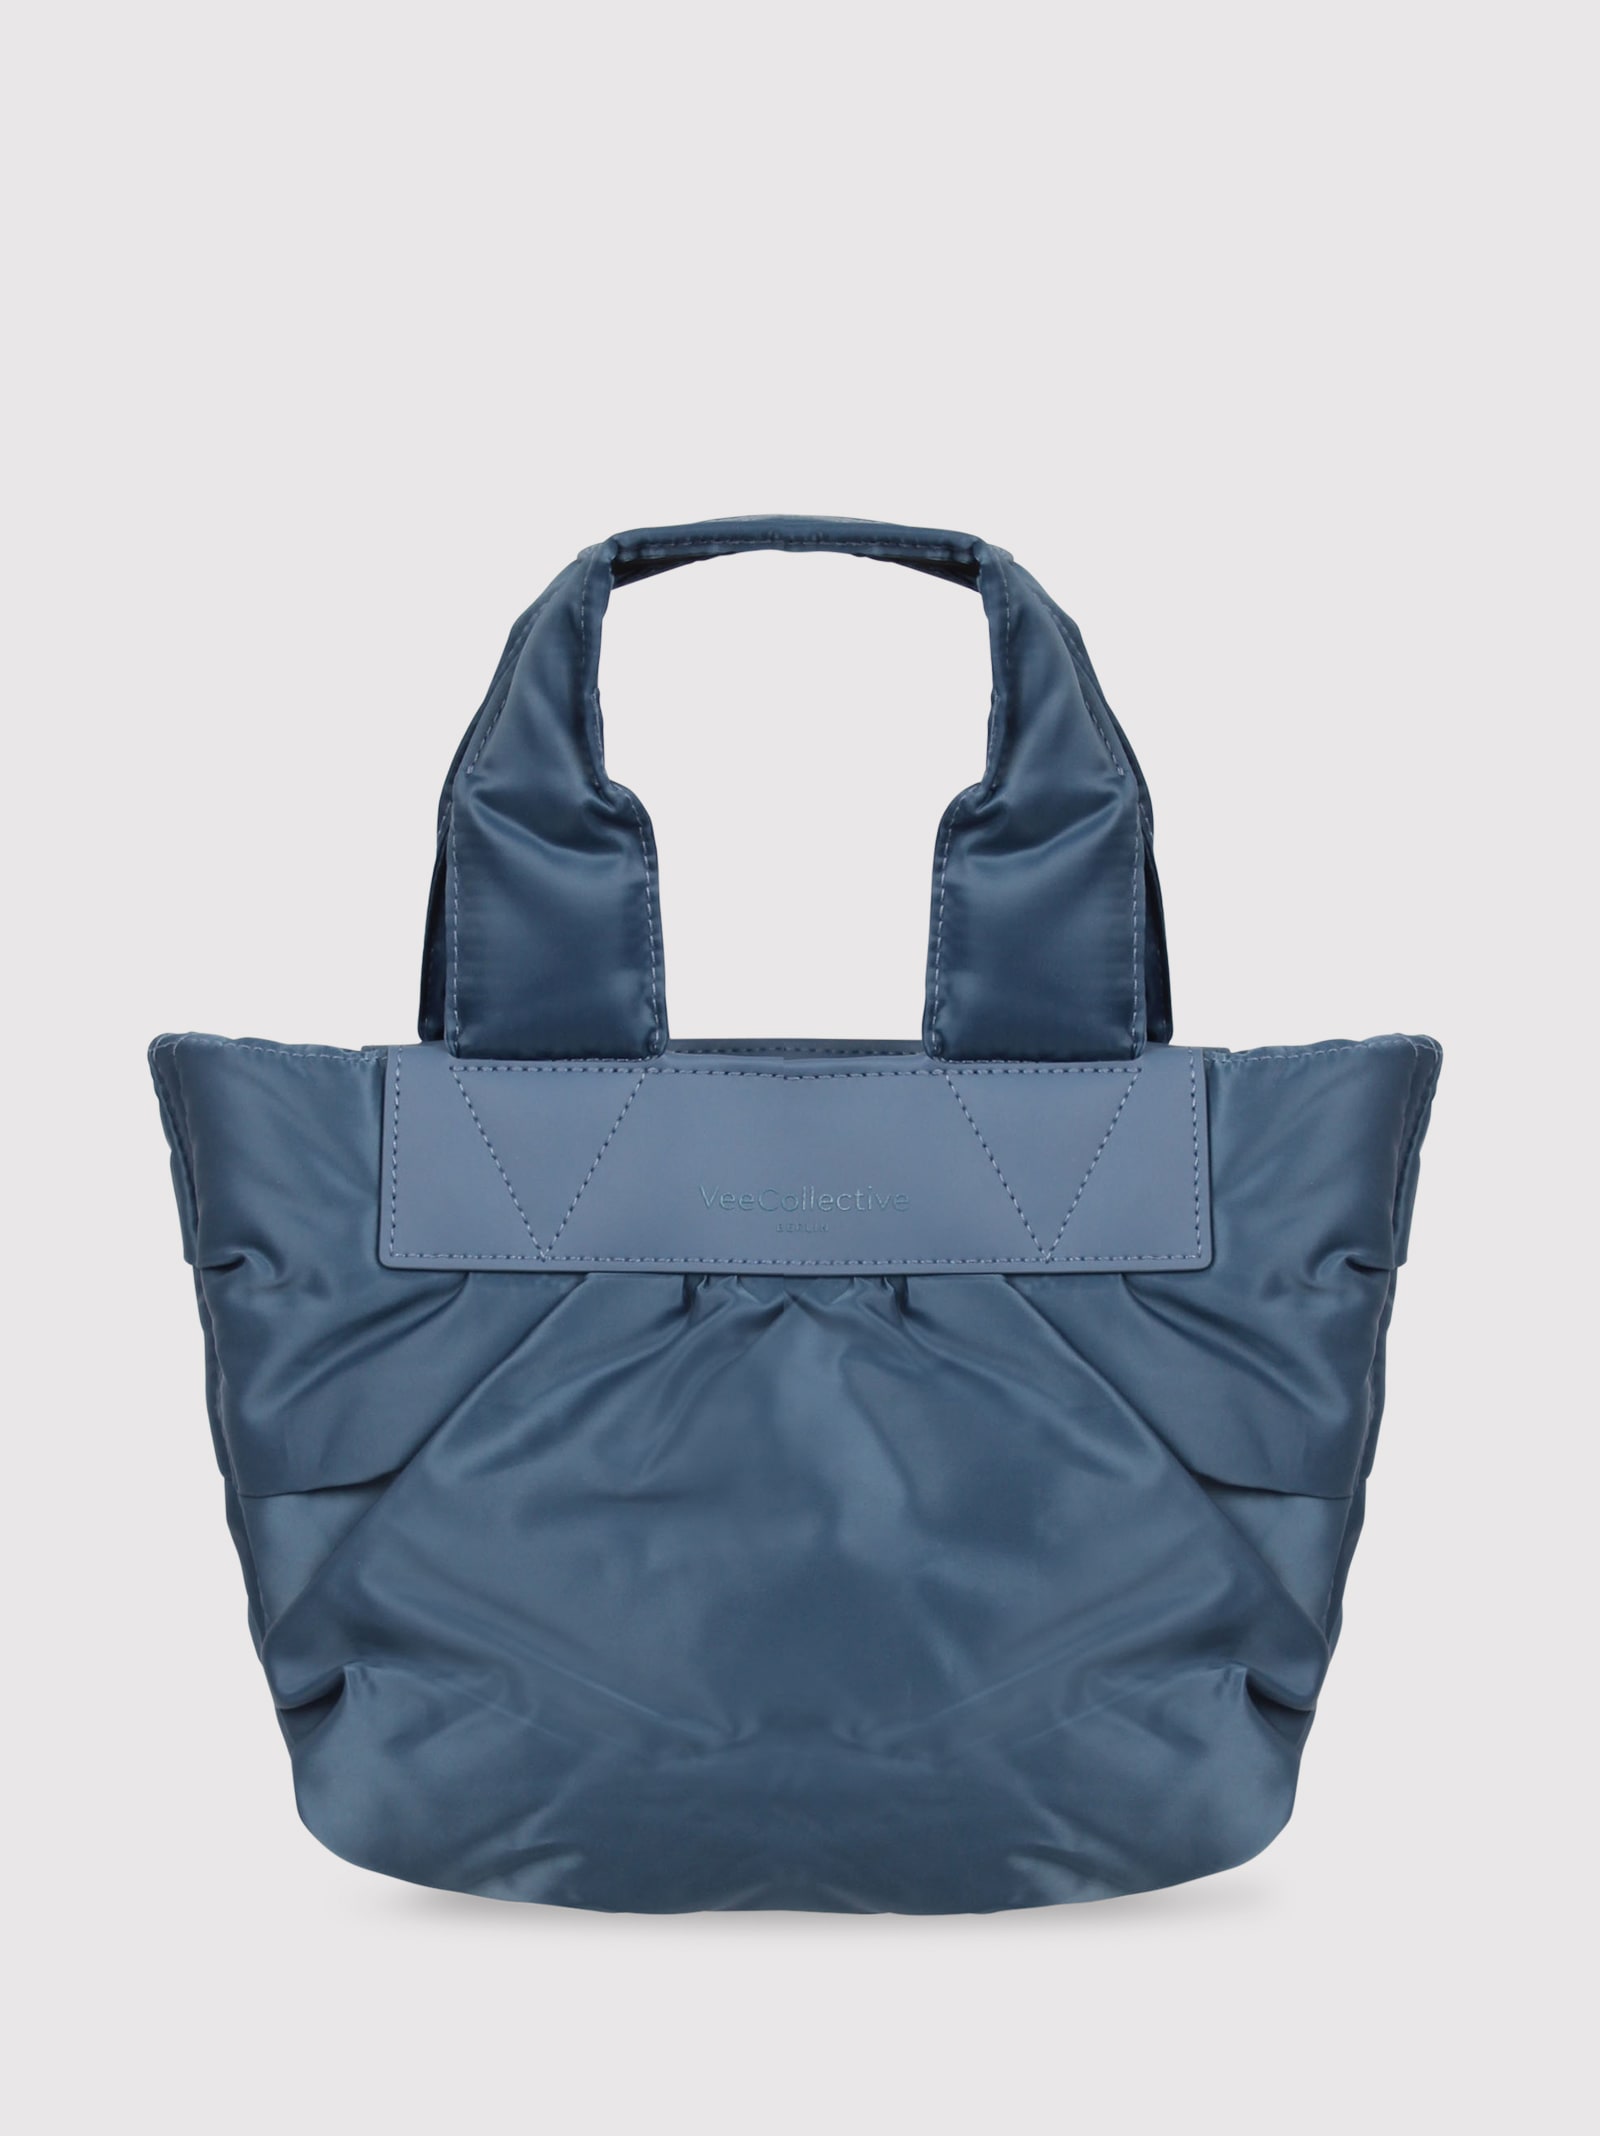 Shop Veecollective Vee Collective Mini Caba Tote Bag